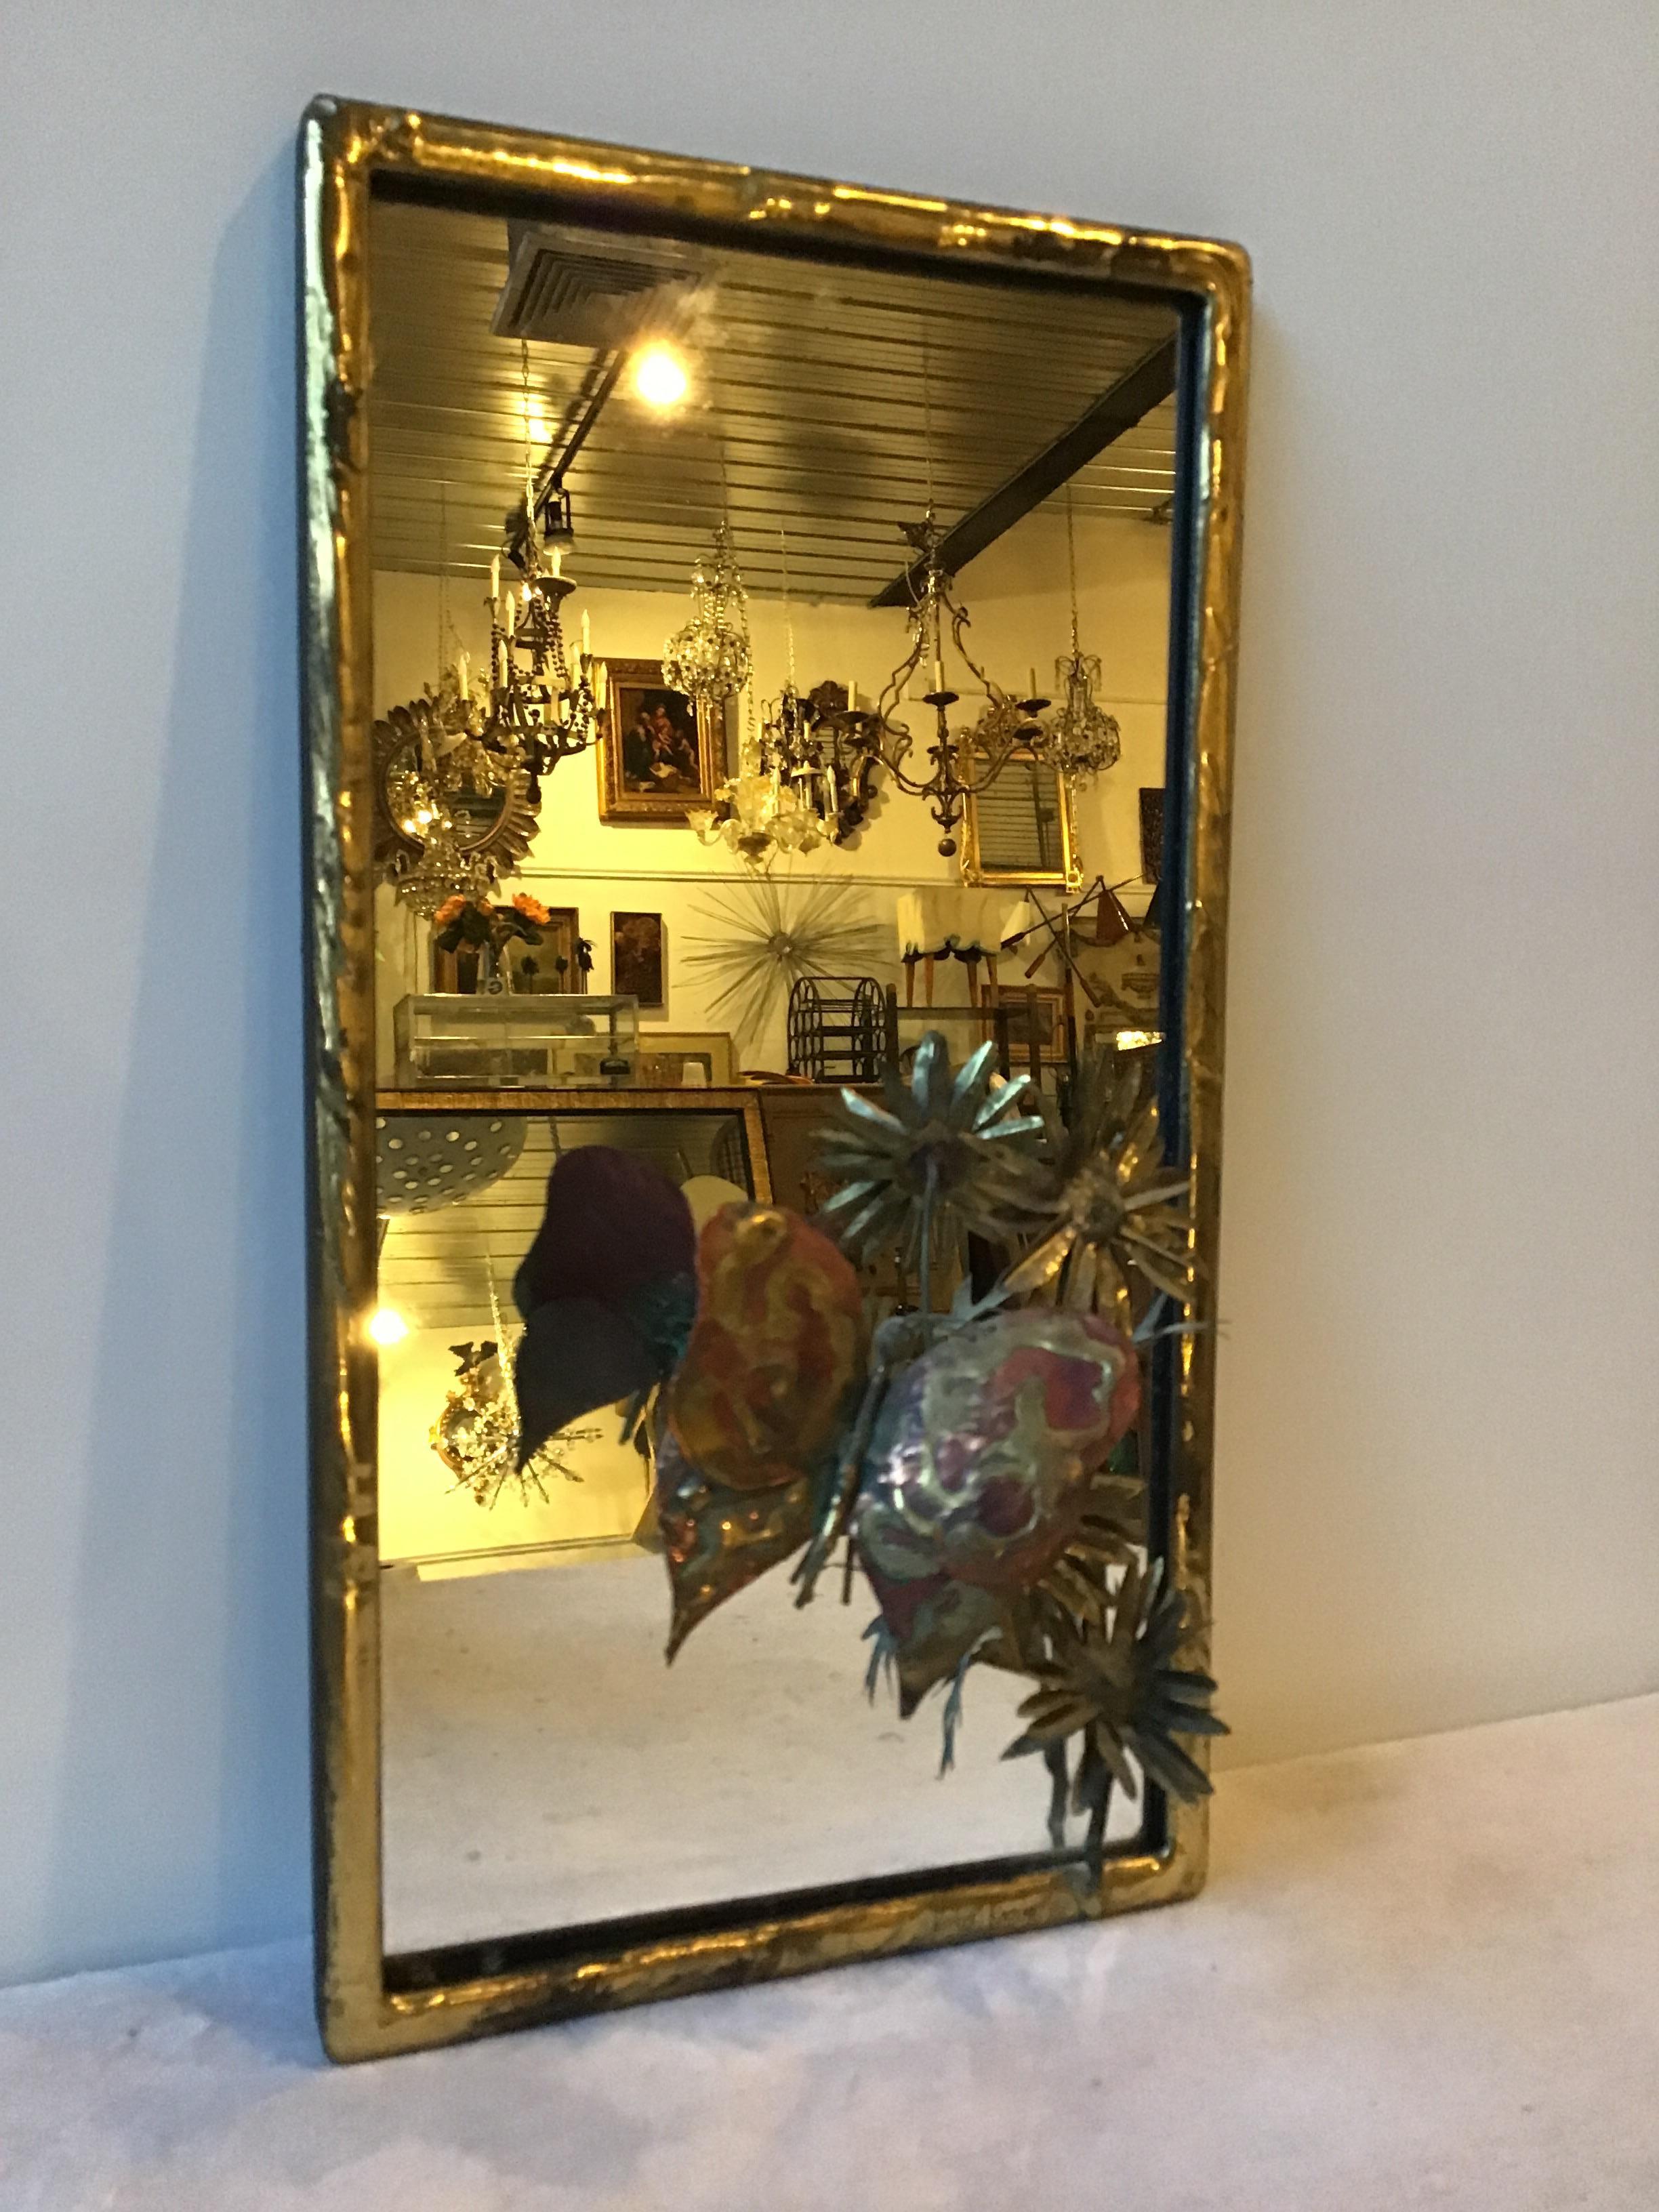 1970s brass-plated mirror with butterfly and flower sculpture .
Signed Nober Roosnr.